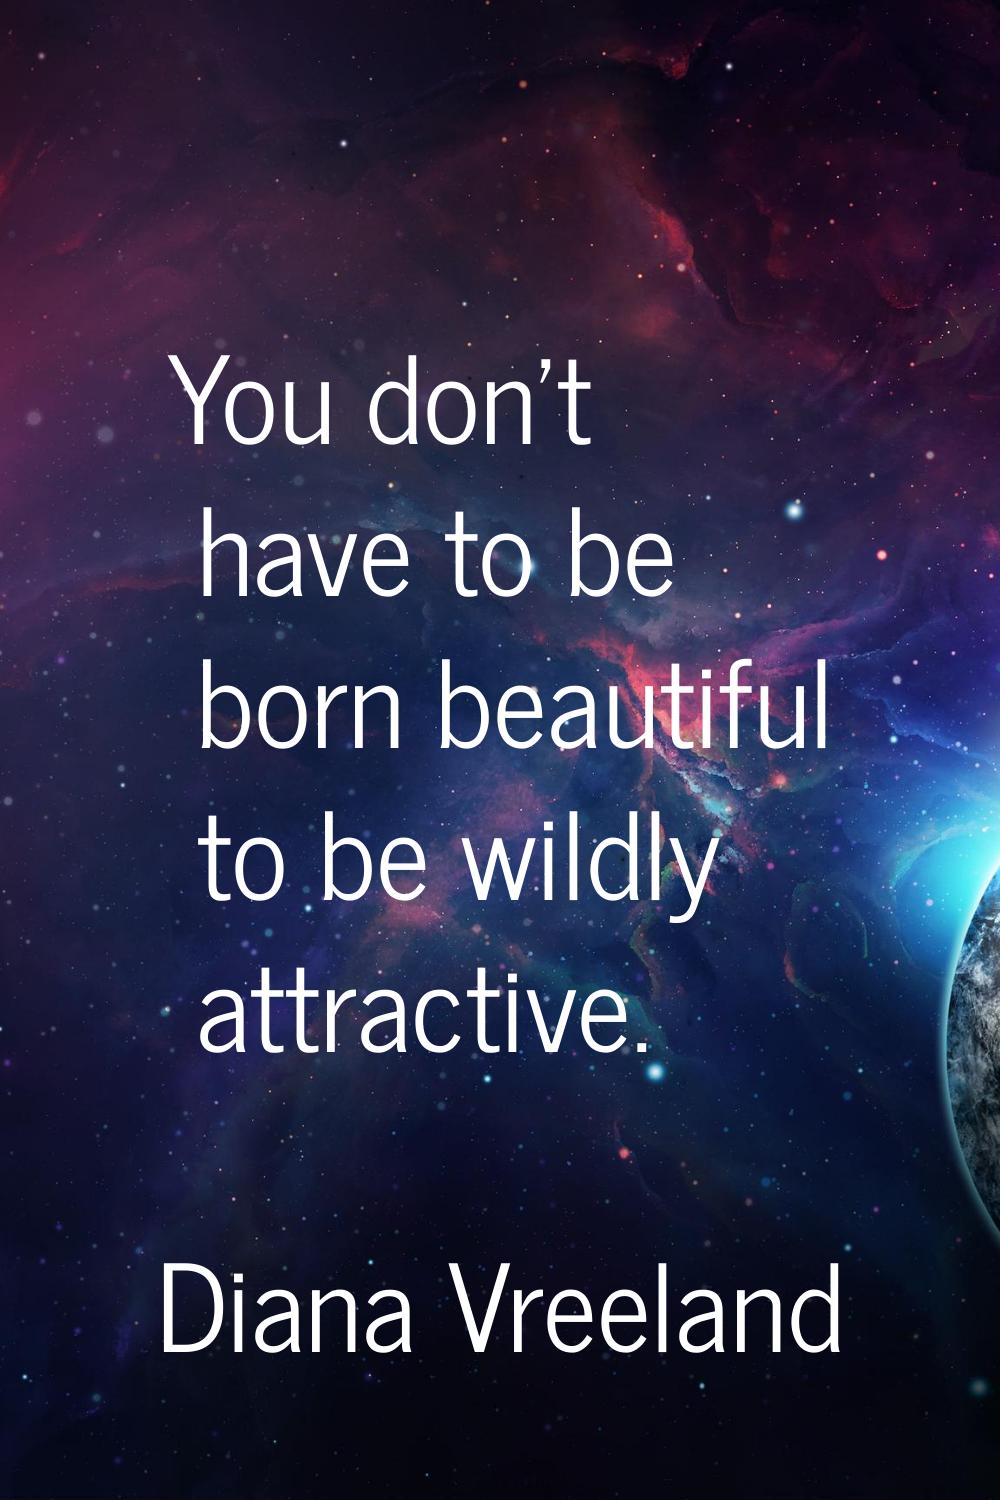 You don't have to be born beautiful to be wildly attractive.